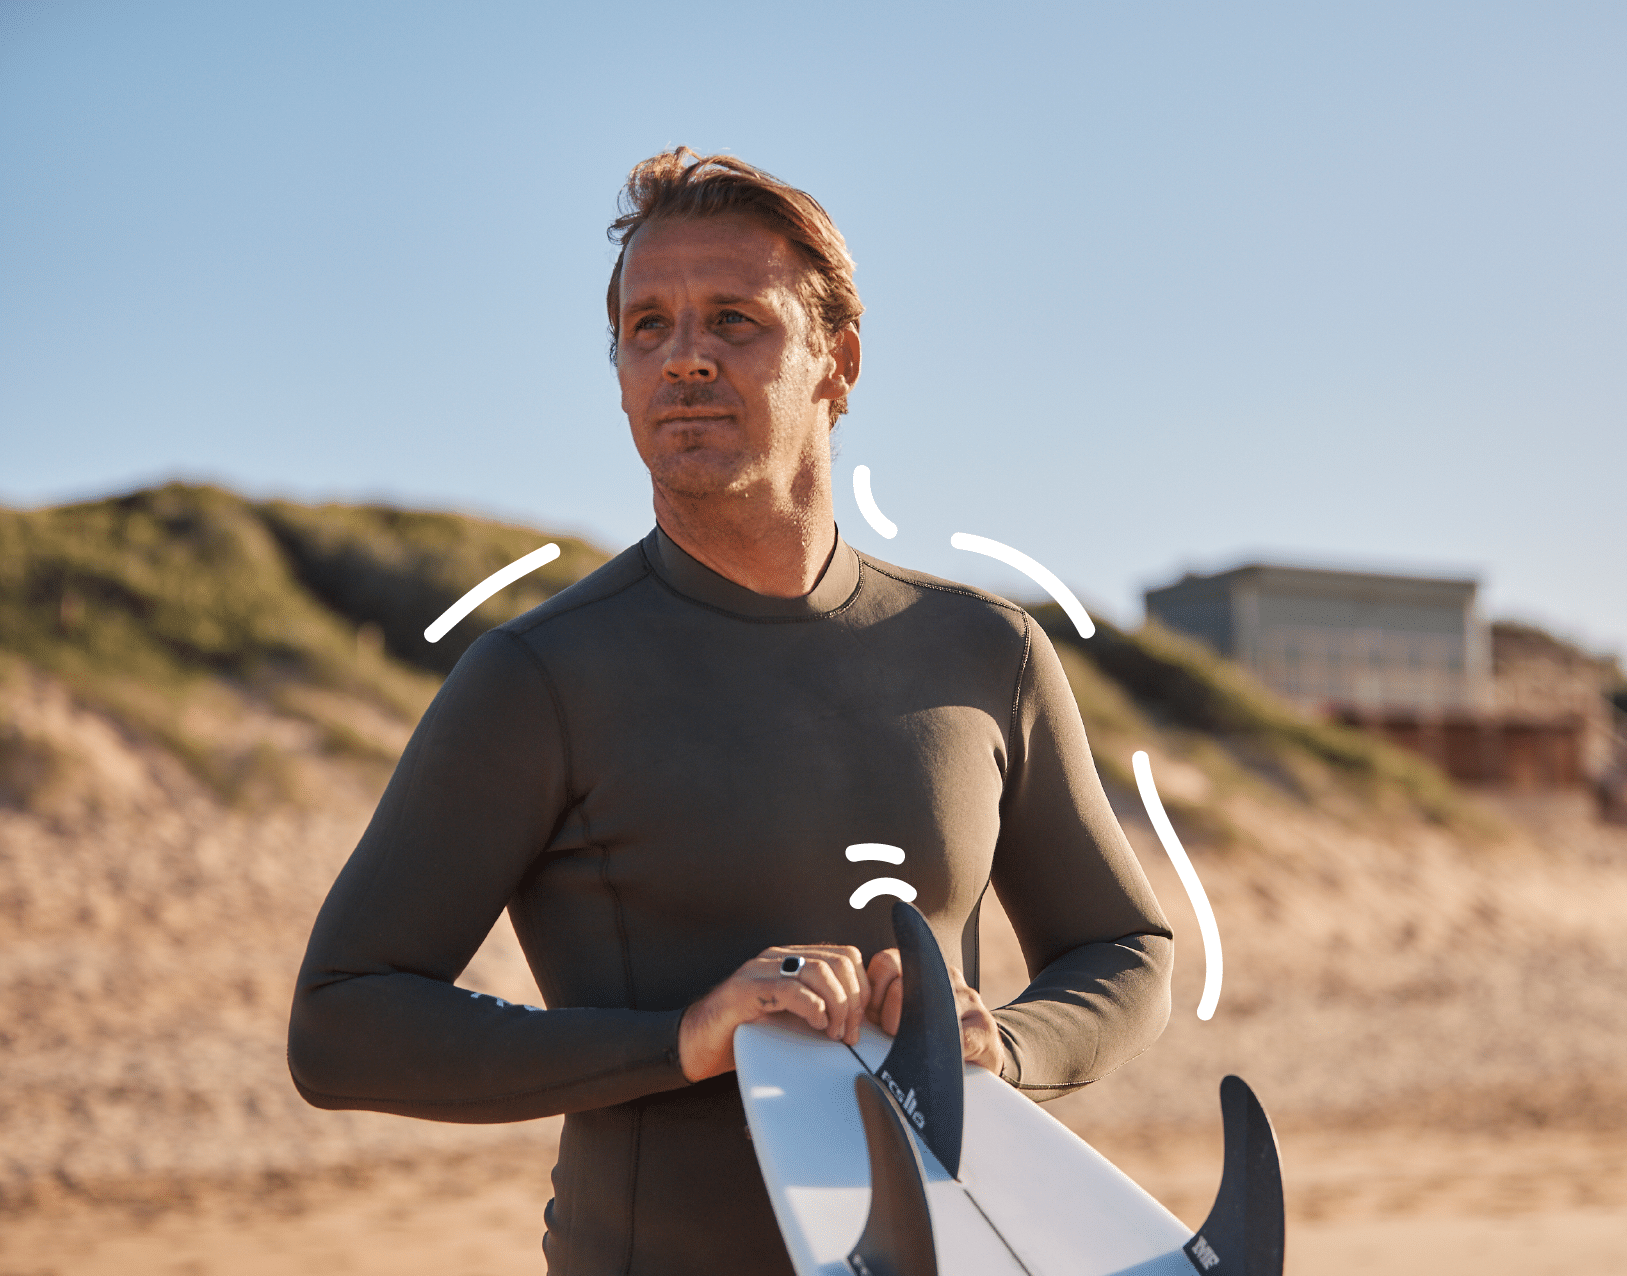 Mitch tells us about his journey with ankylosing spondylitis (AS). Back in 2009, he was on the verge of reaching his dreams to become a professional surfer.